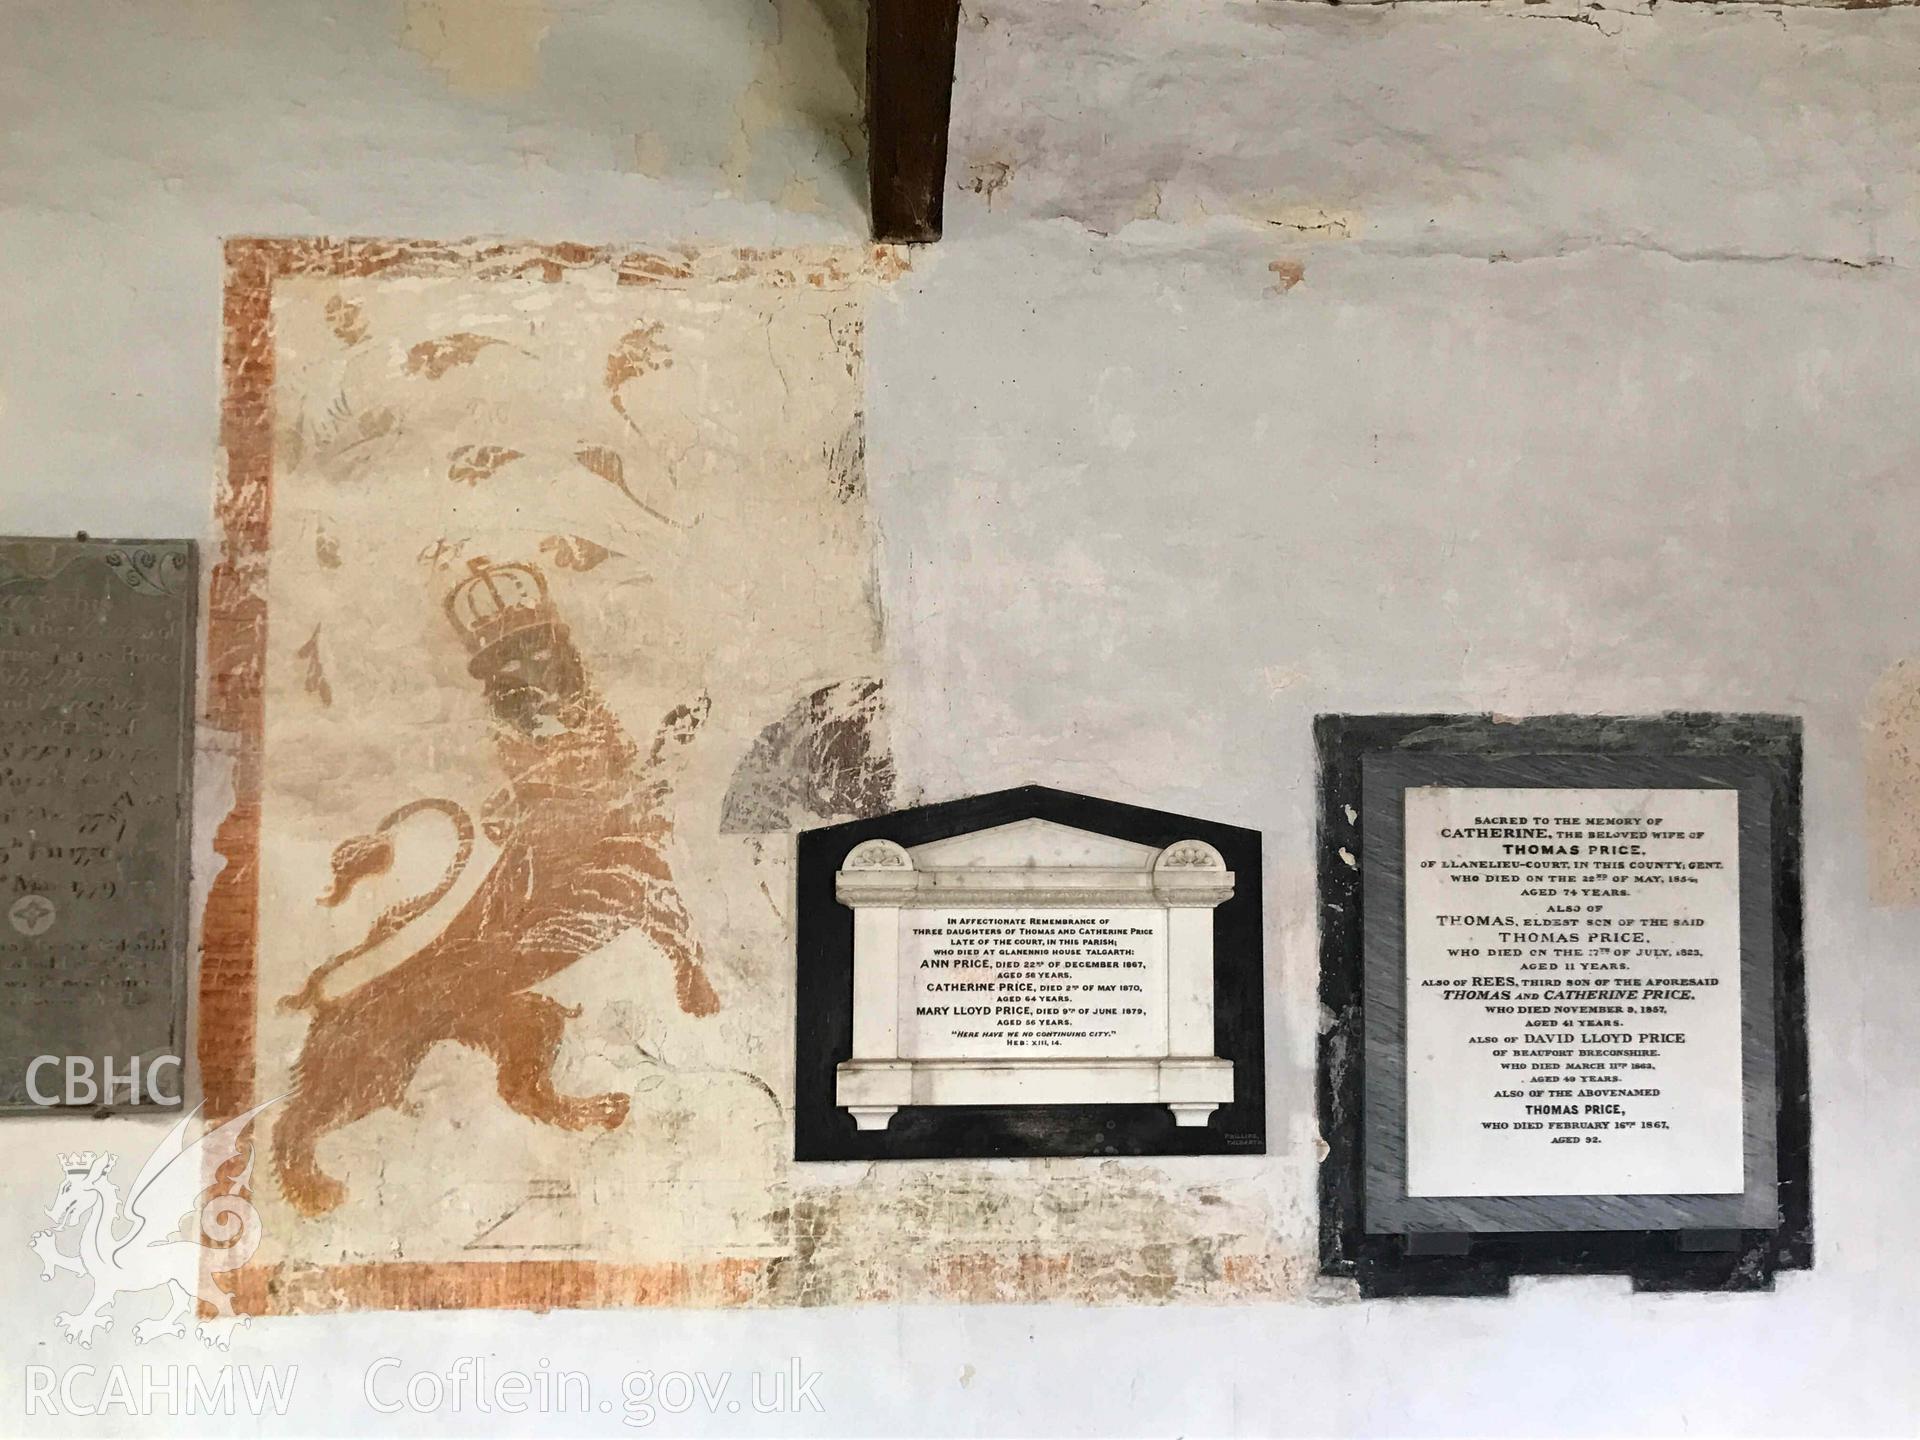 Digital photograph showing wall painting and memorial at St Ellyw's Church, Llanelieu, produced by Paul Davis in 2020